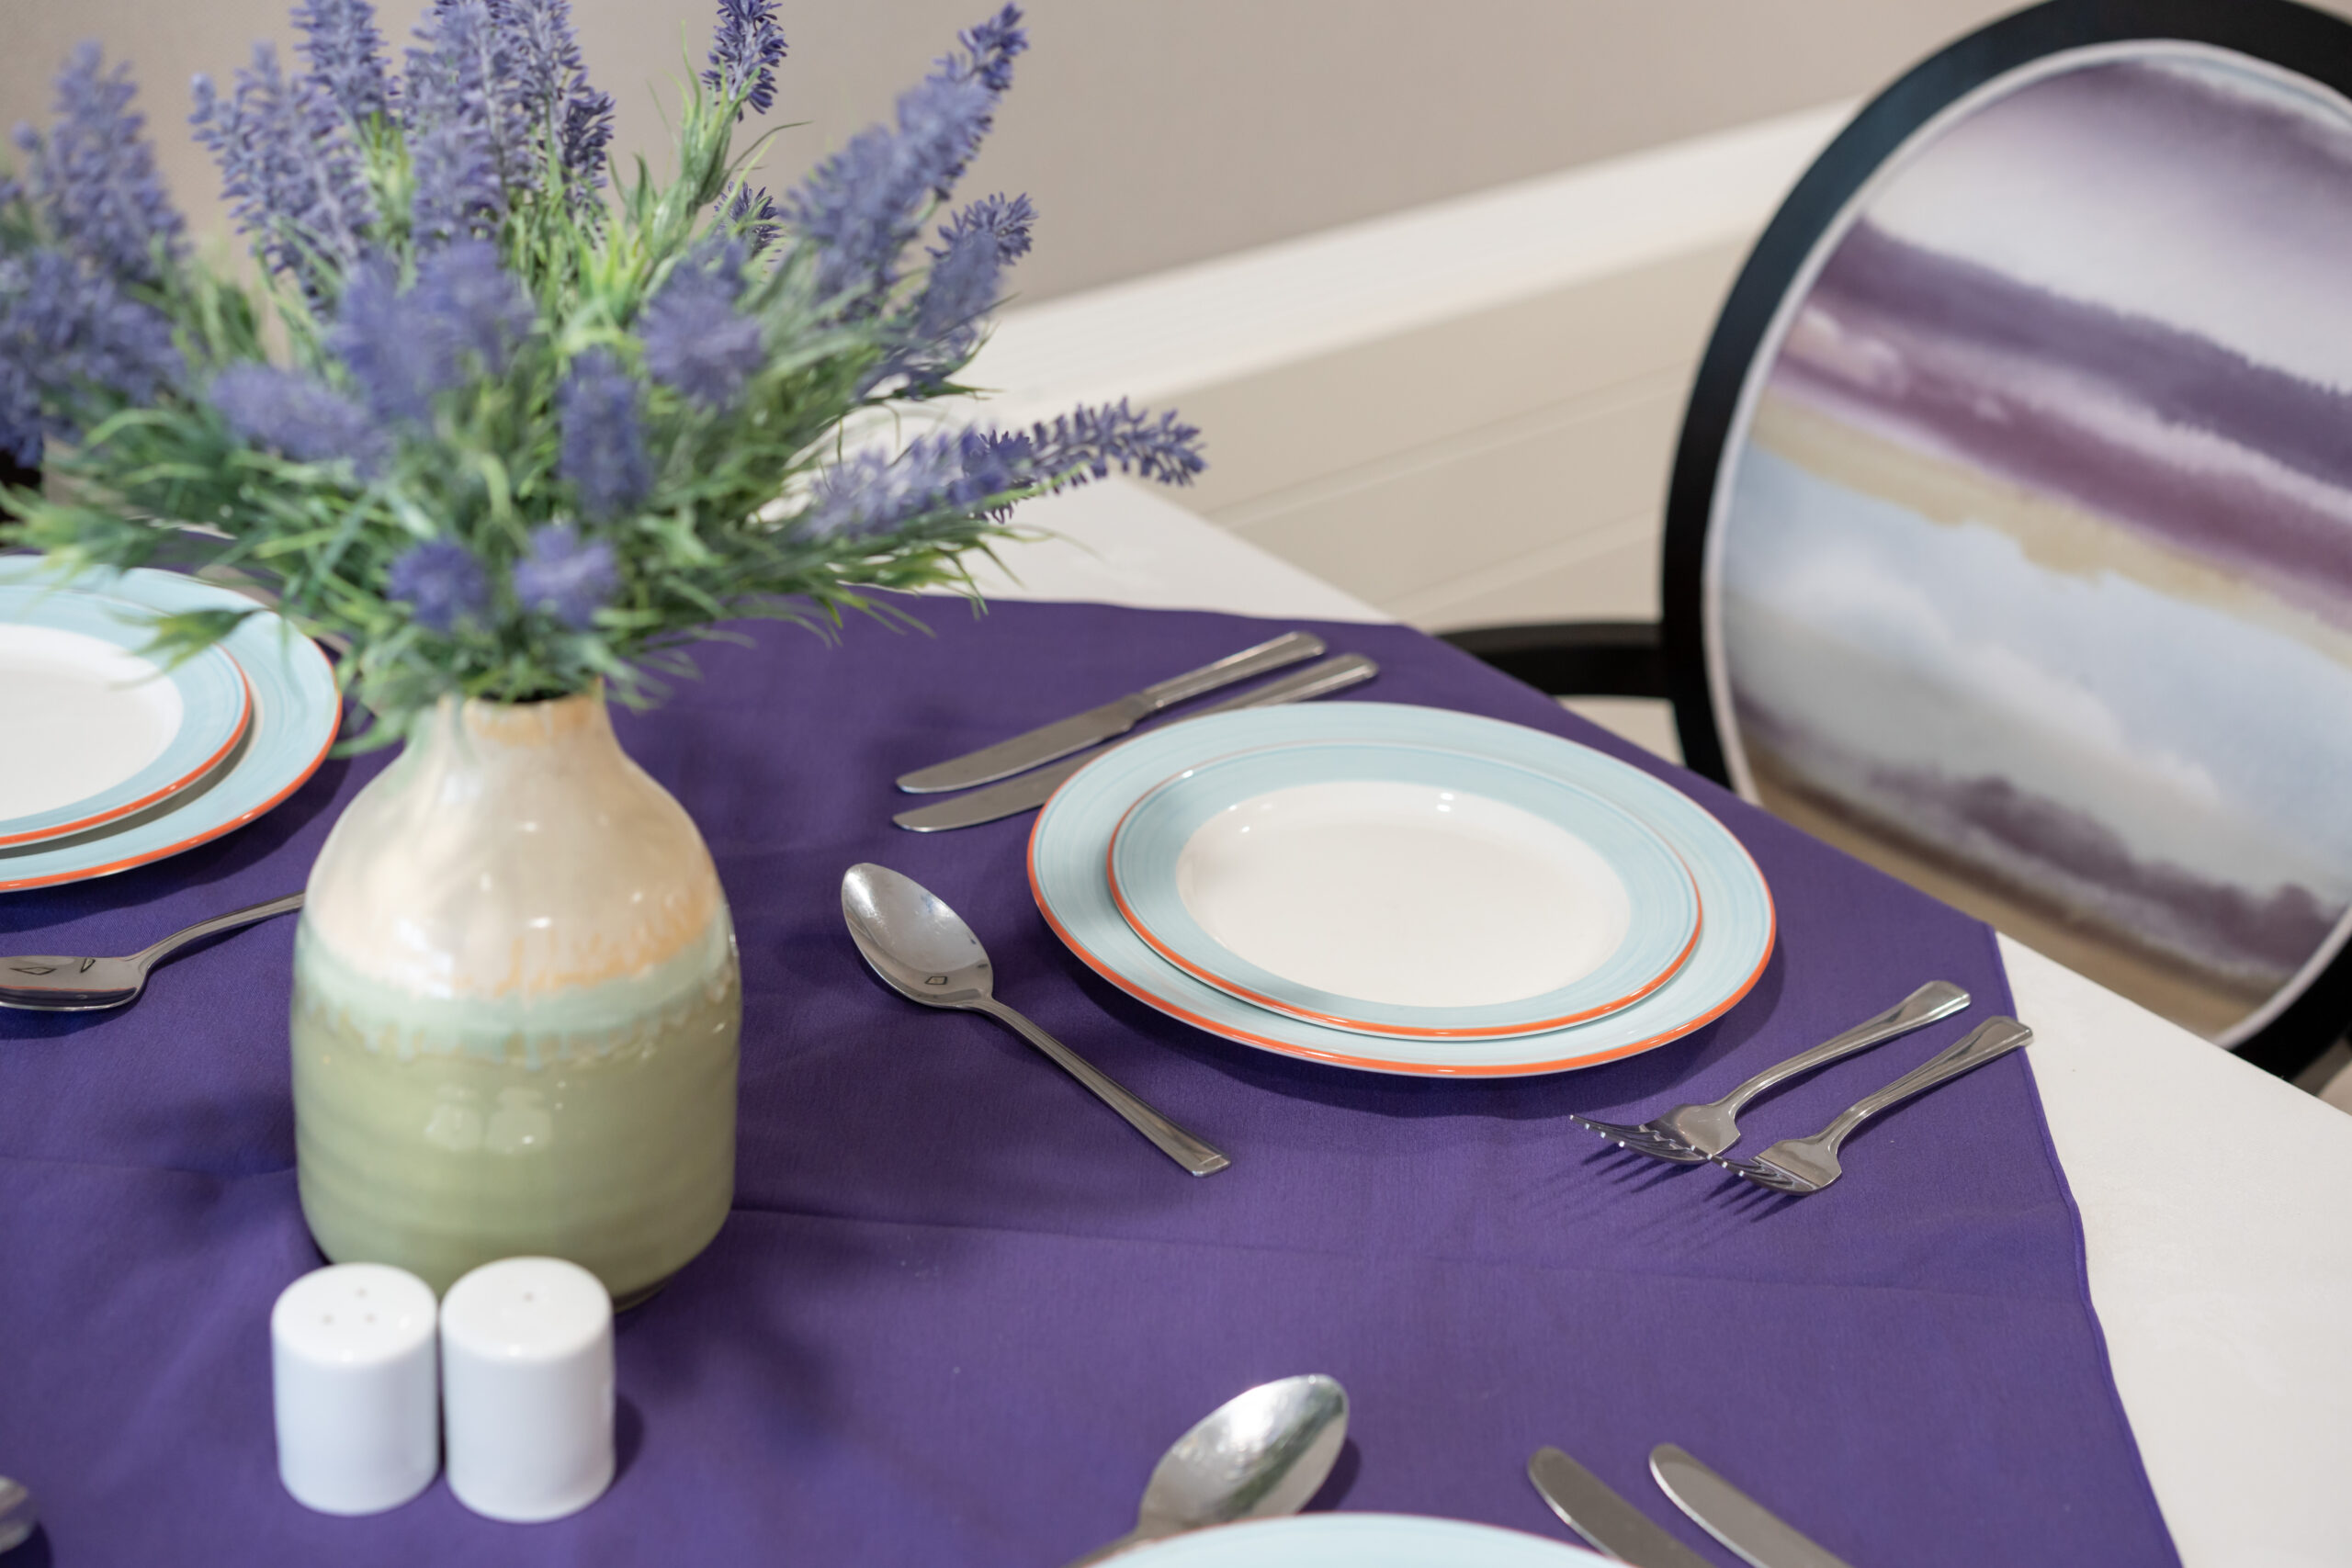 Oakland Care Home in Hastings dining table with plate and cutlery